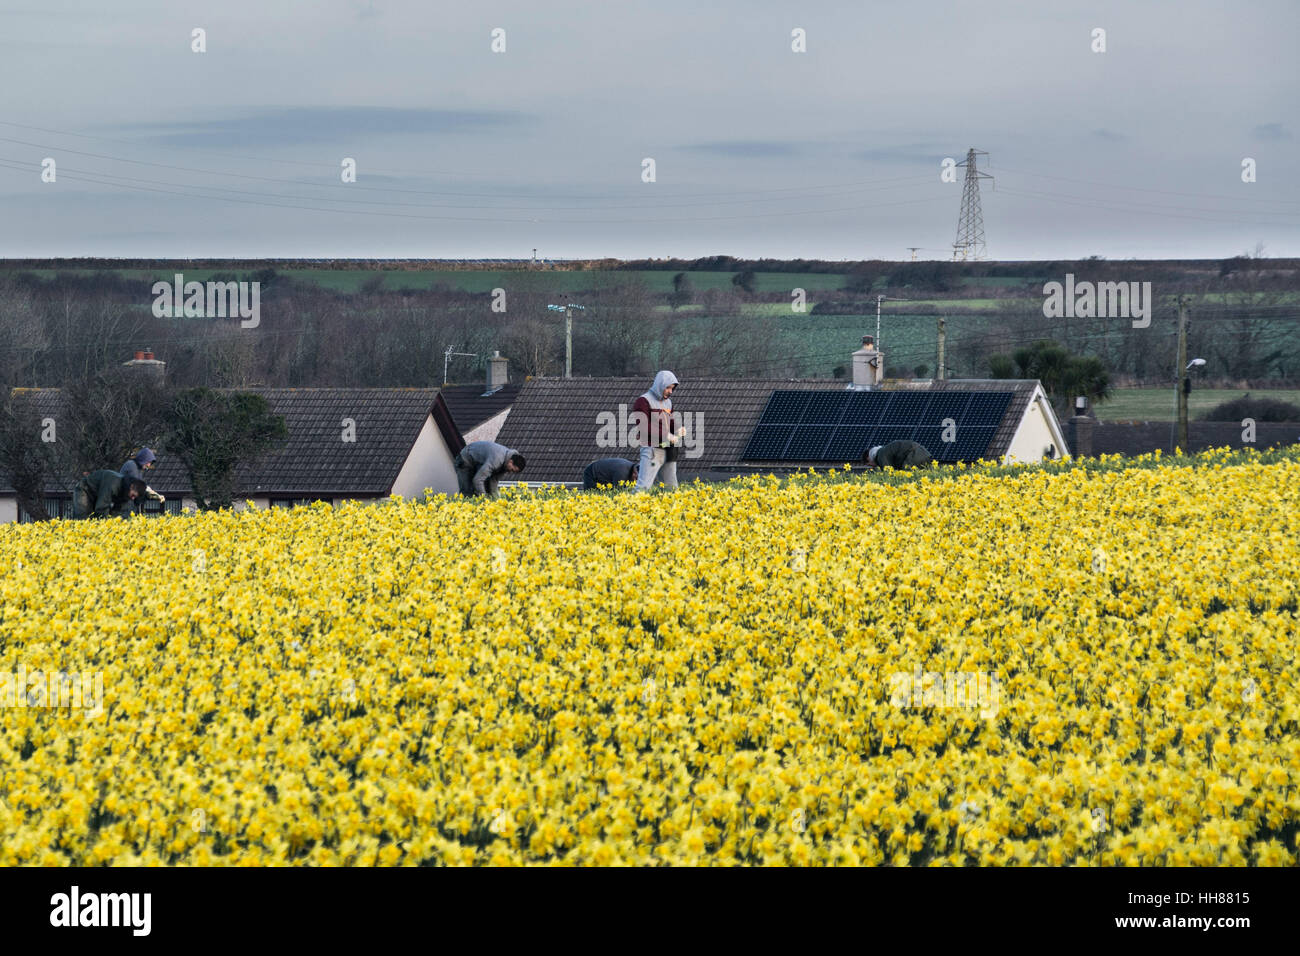 Hayle, Cornwall, UK. 18th January 2017. UK Weather. A clear and sunny day in south west Cornwall, with Daffodil fields in full bloom. Credit: cwallpix/Alamy Live News Stock Photo